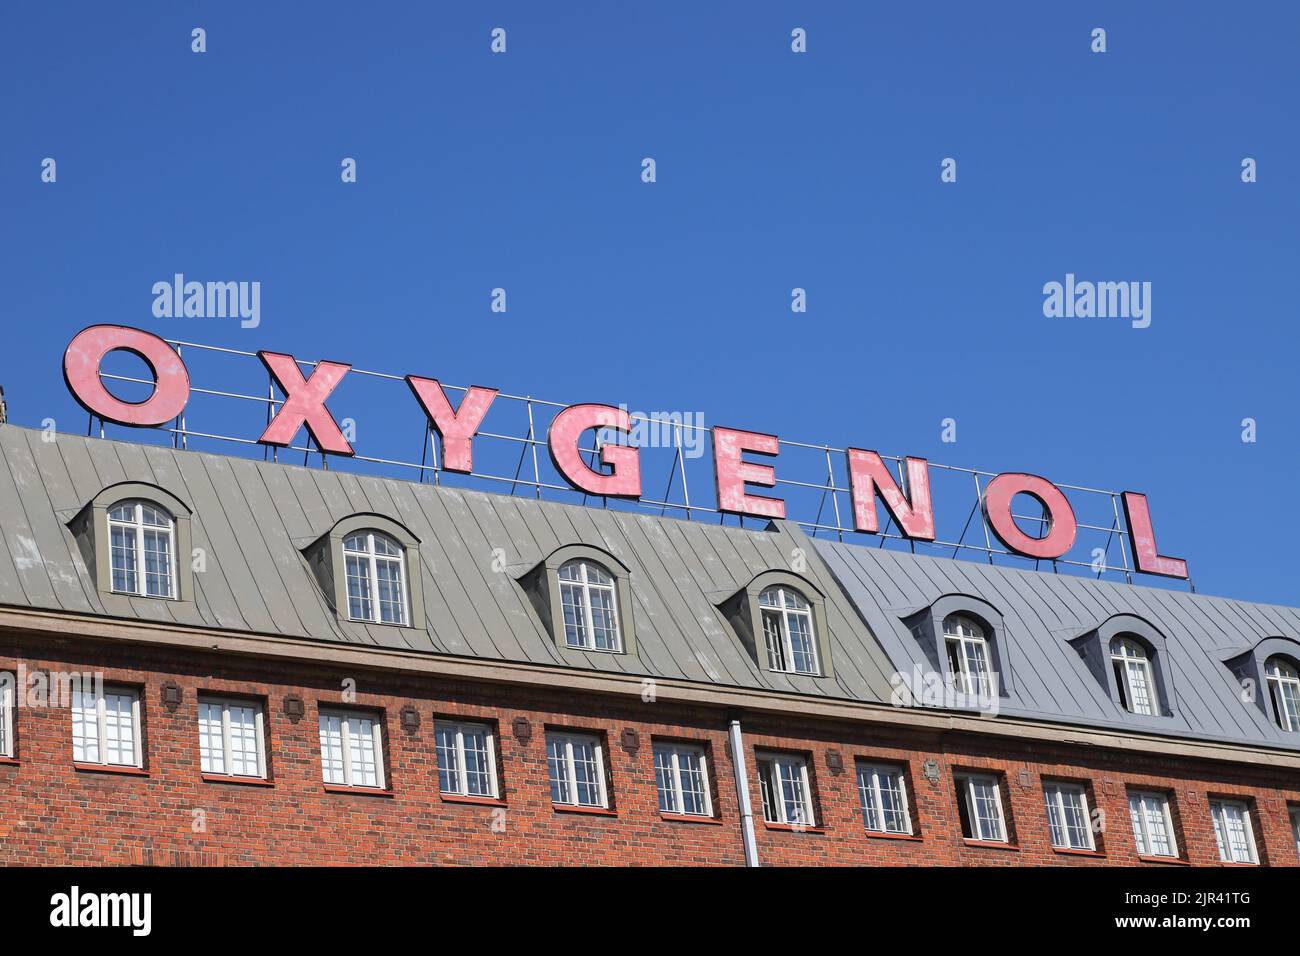 Helsinki, Finland - August 20, 2022: Close-up view of the  advertising sign for Oxygenol on the roof of a building on Hameentie street. Stock Photo